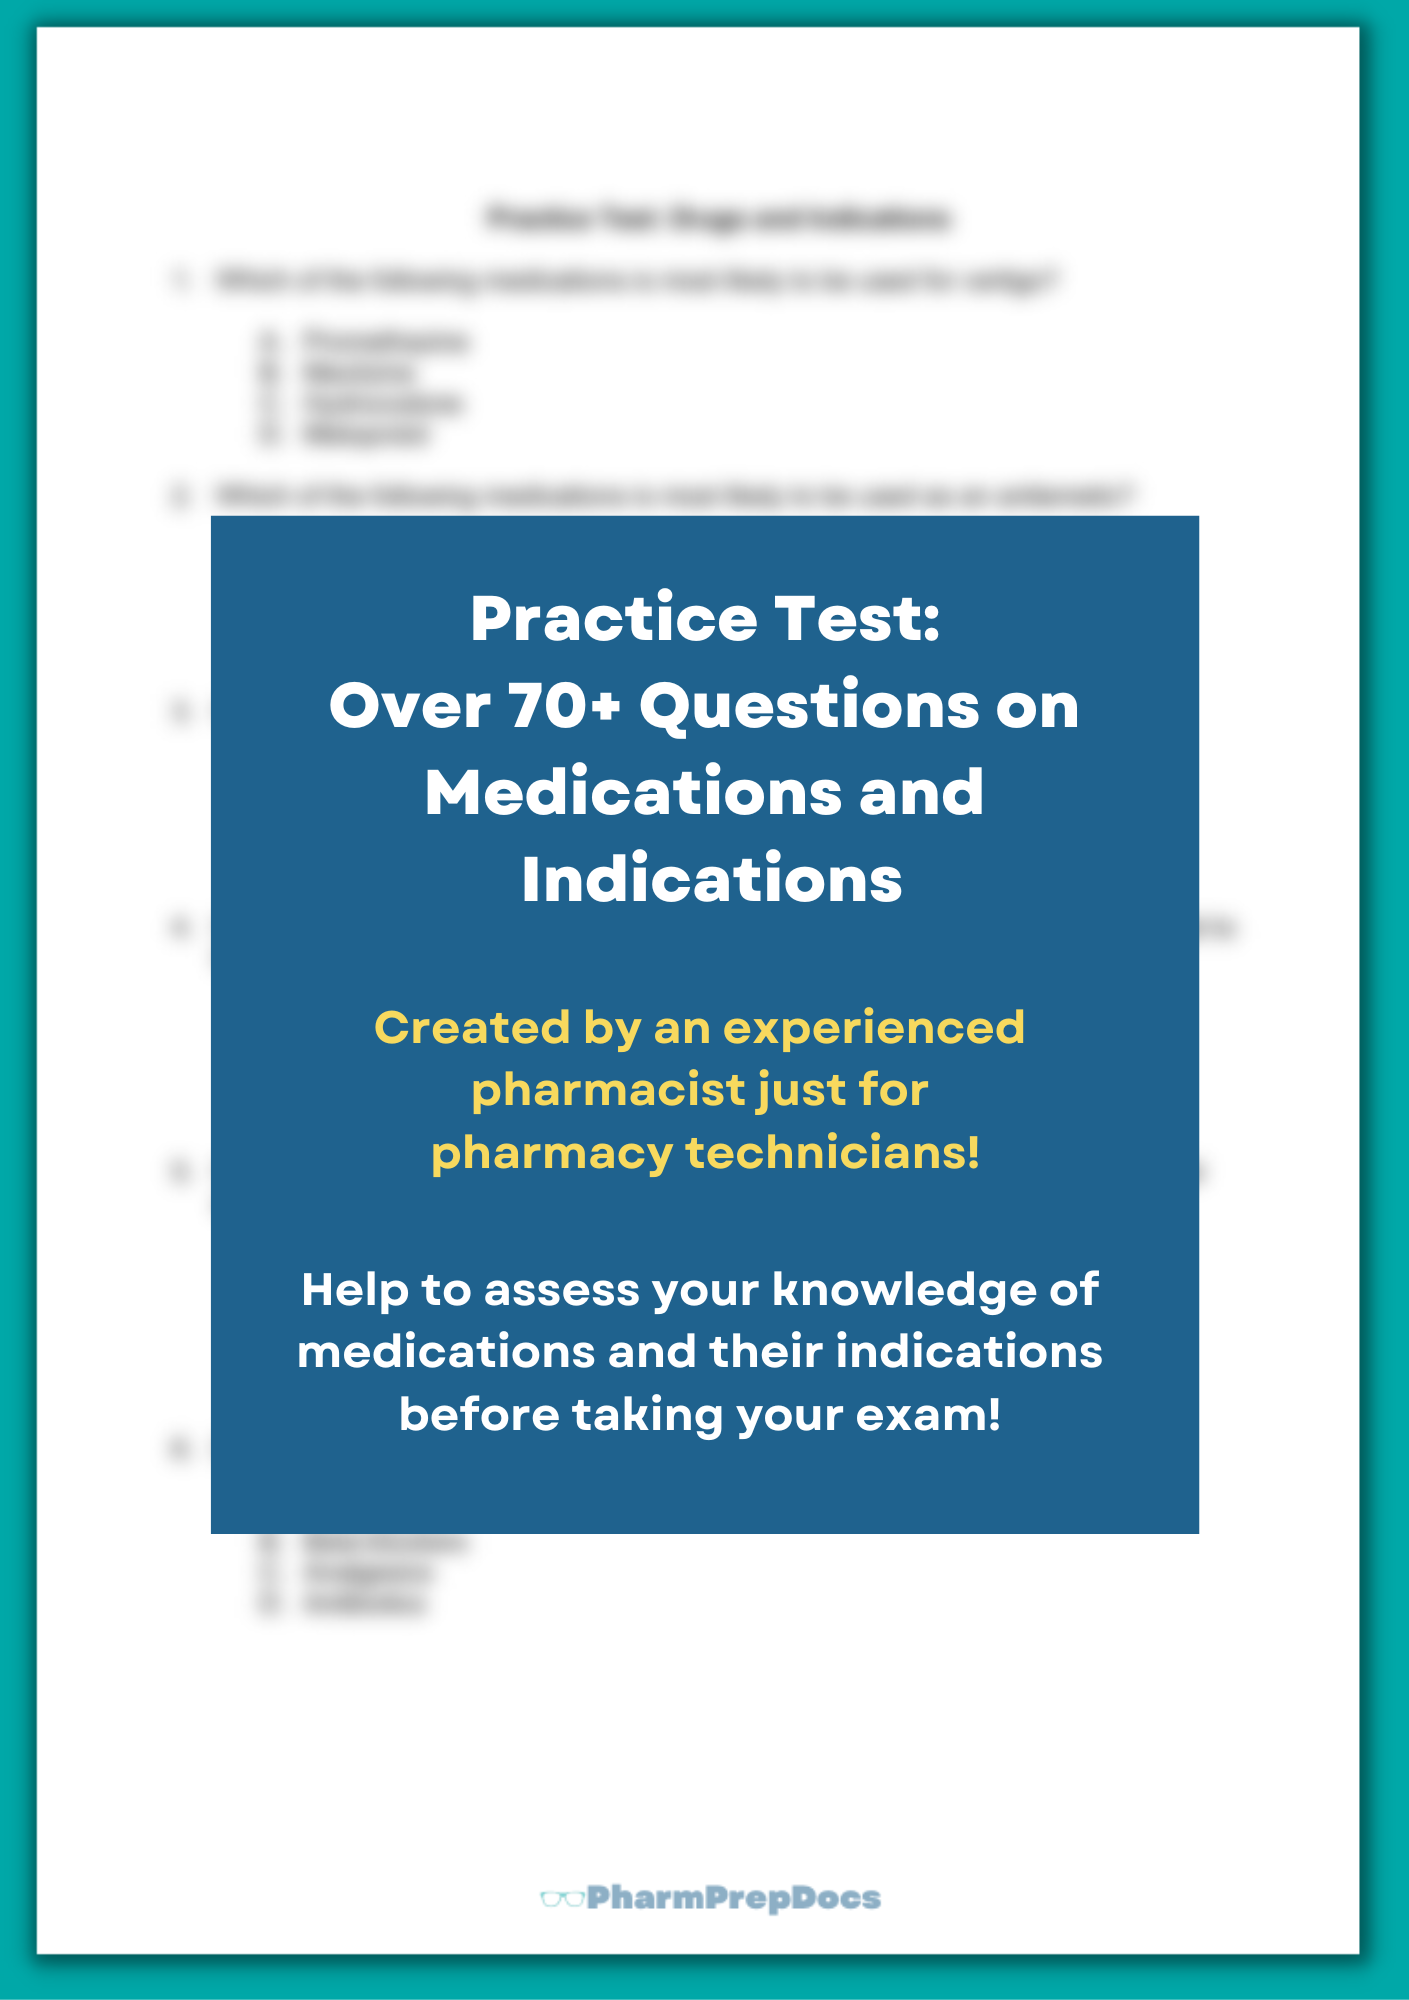 Practice Test: Medications and Indications